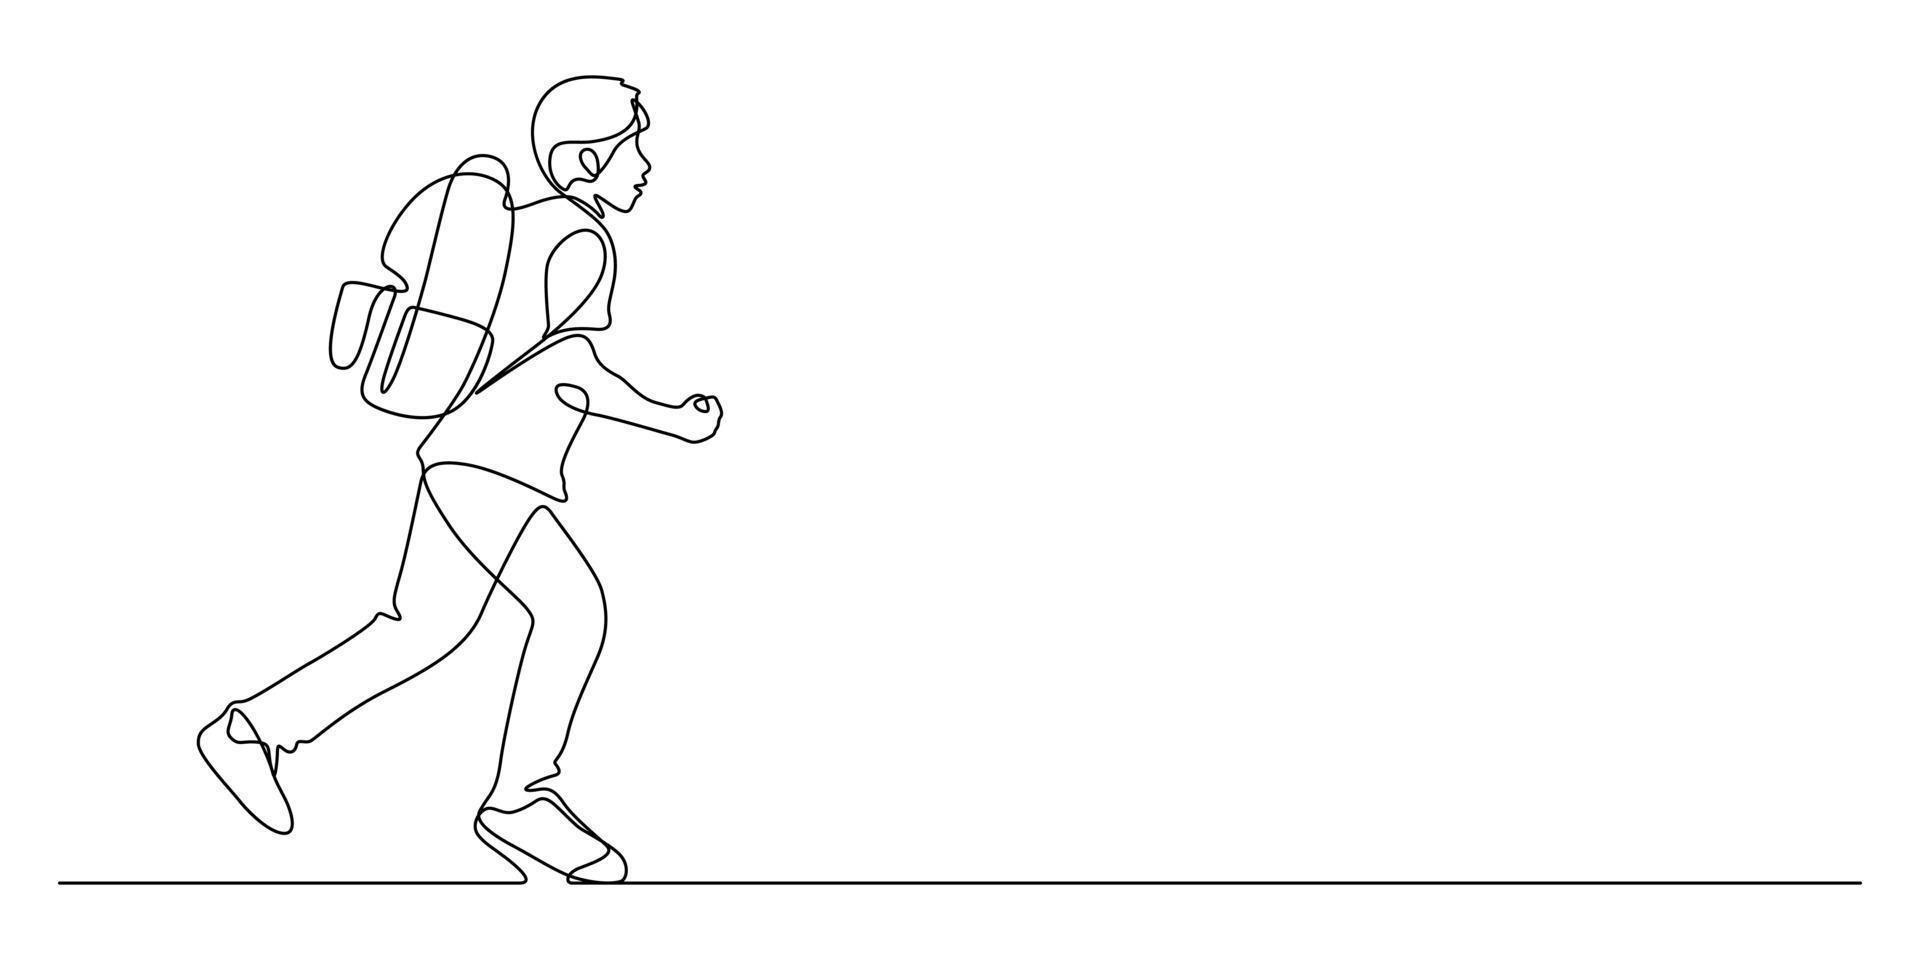 one line drawing of happiness student running vector